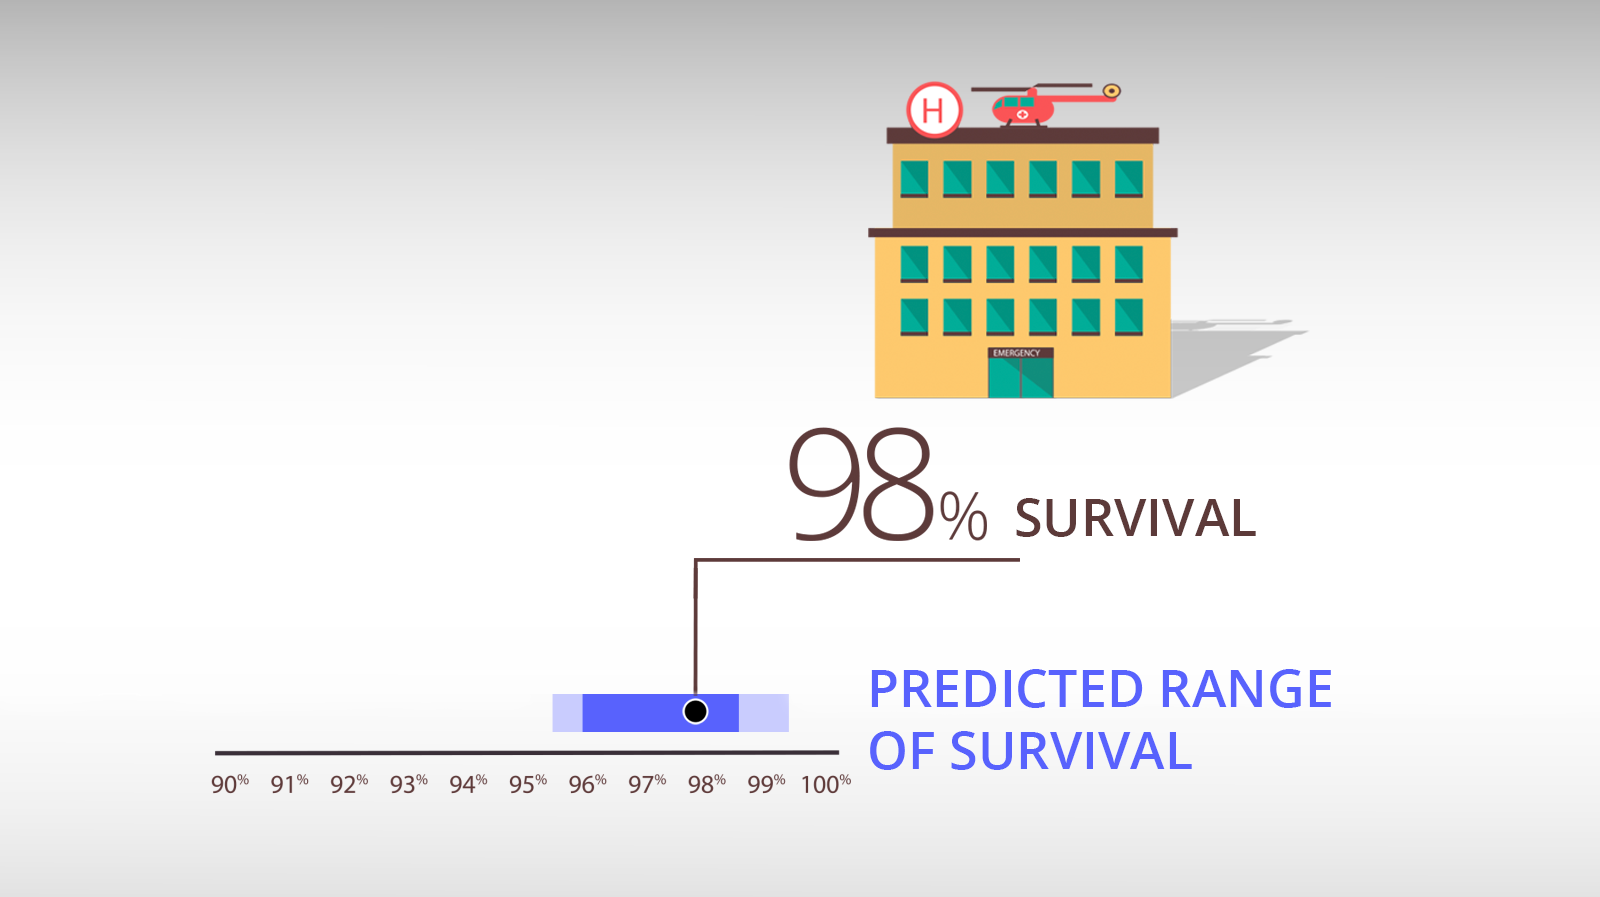 Then we compare survival rate to the predicted range.